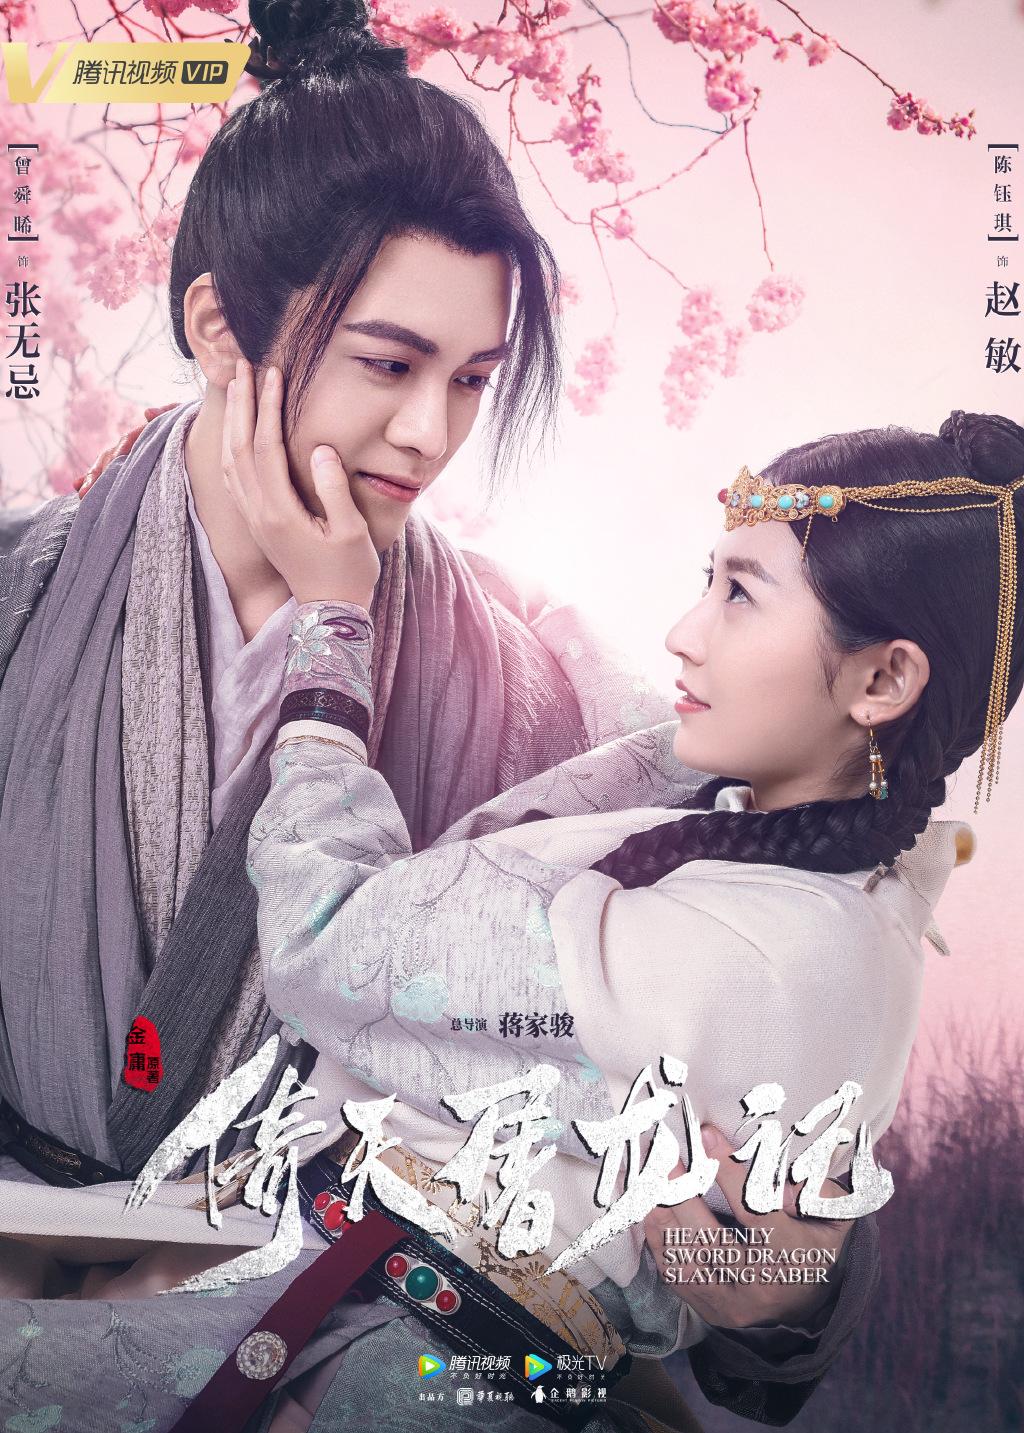 Updated: Chinese Dramas You Should Watch for 2019. Hotpot